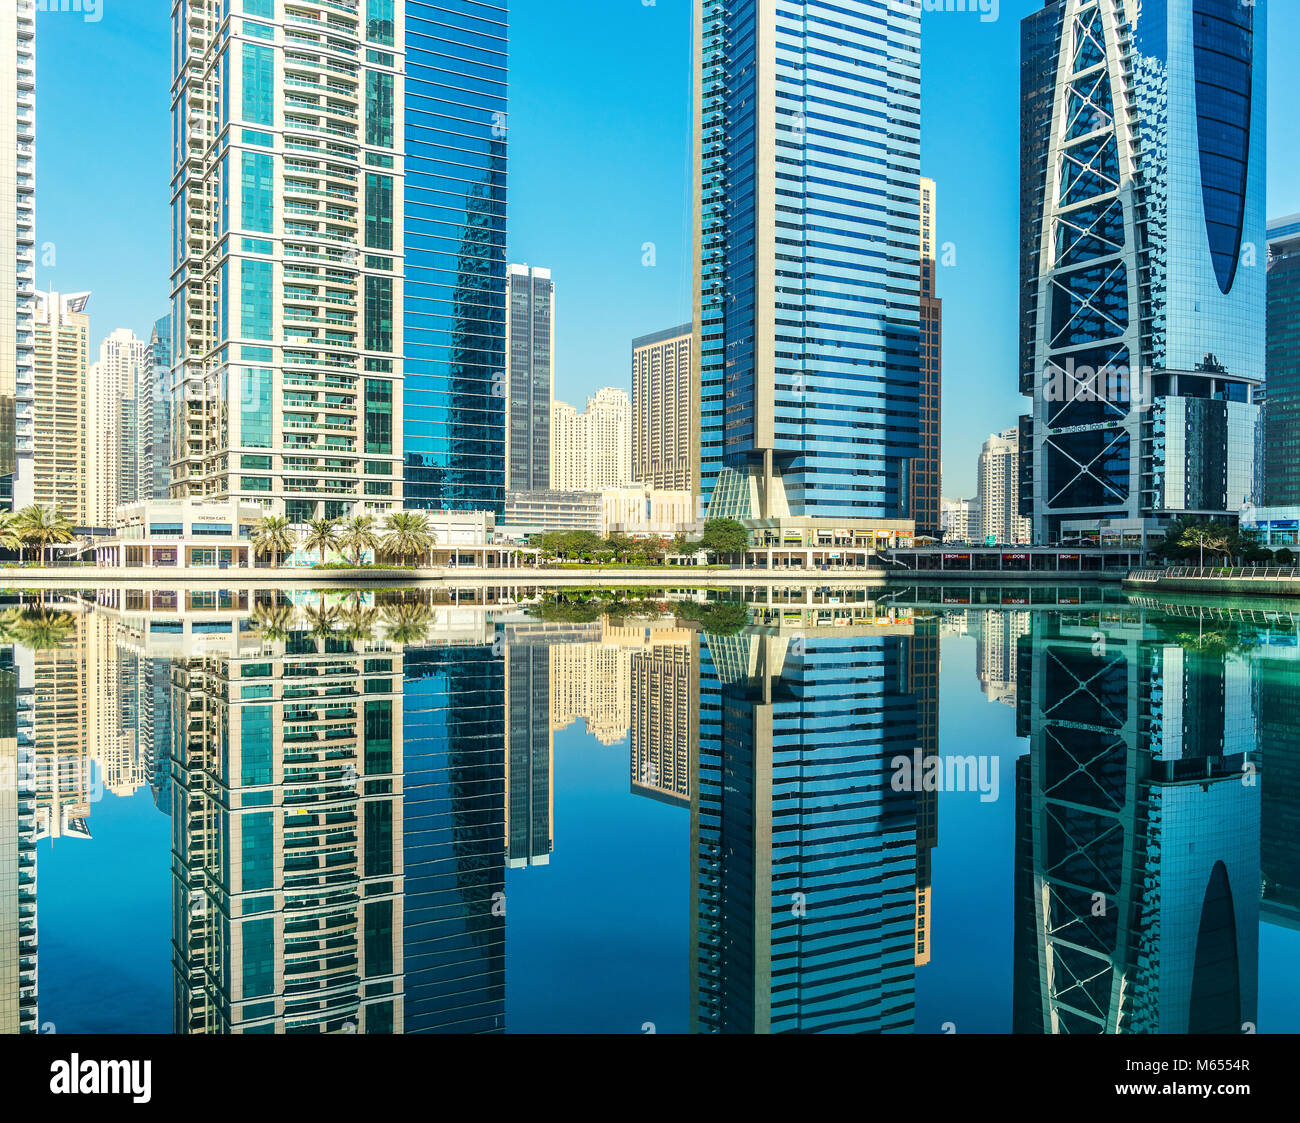 31th December 2017 - Dubai, UAE. The Jumeirah Lakes Towers reflecting in the still water. Stock Photo